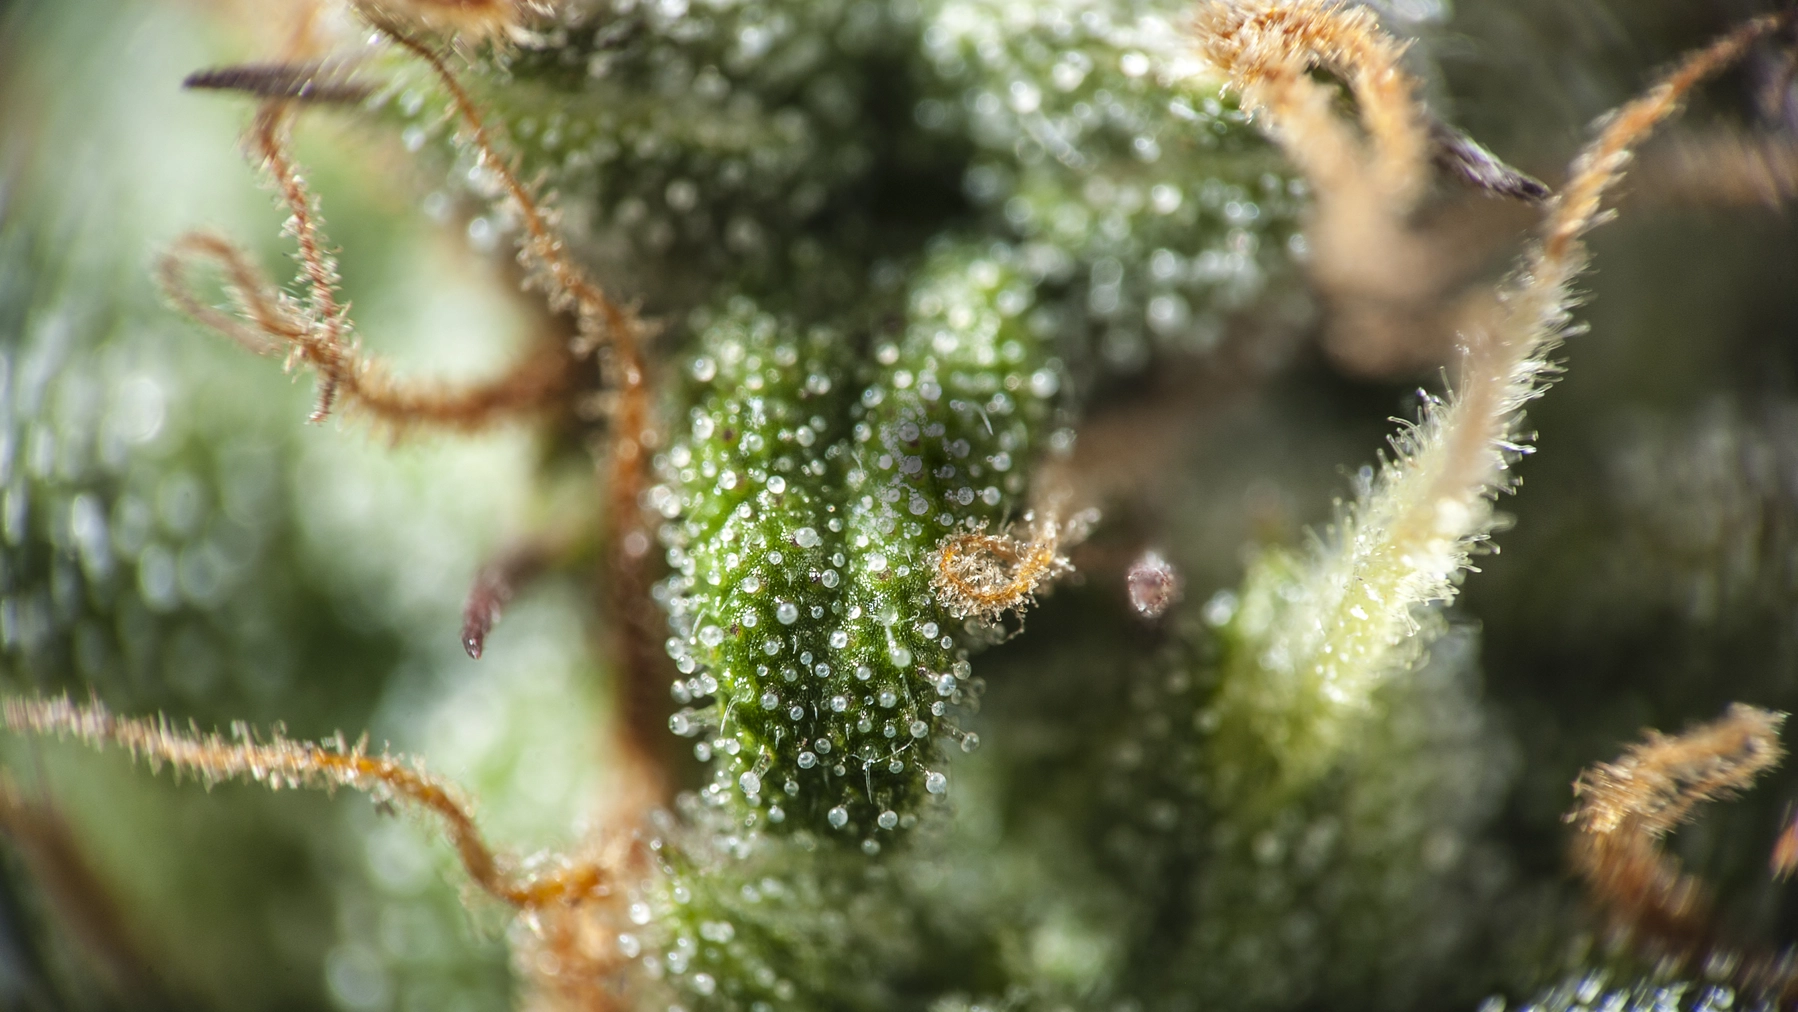 Cannabinoid science: From seed to medicine